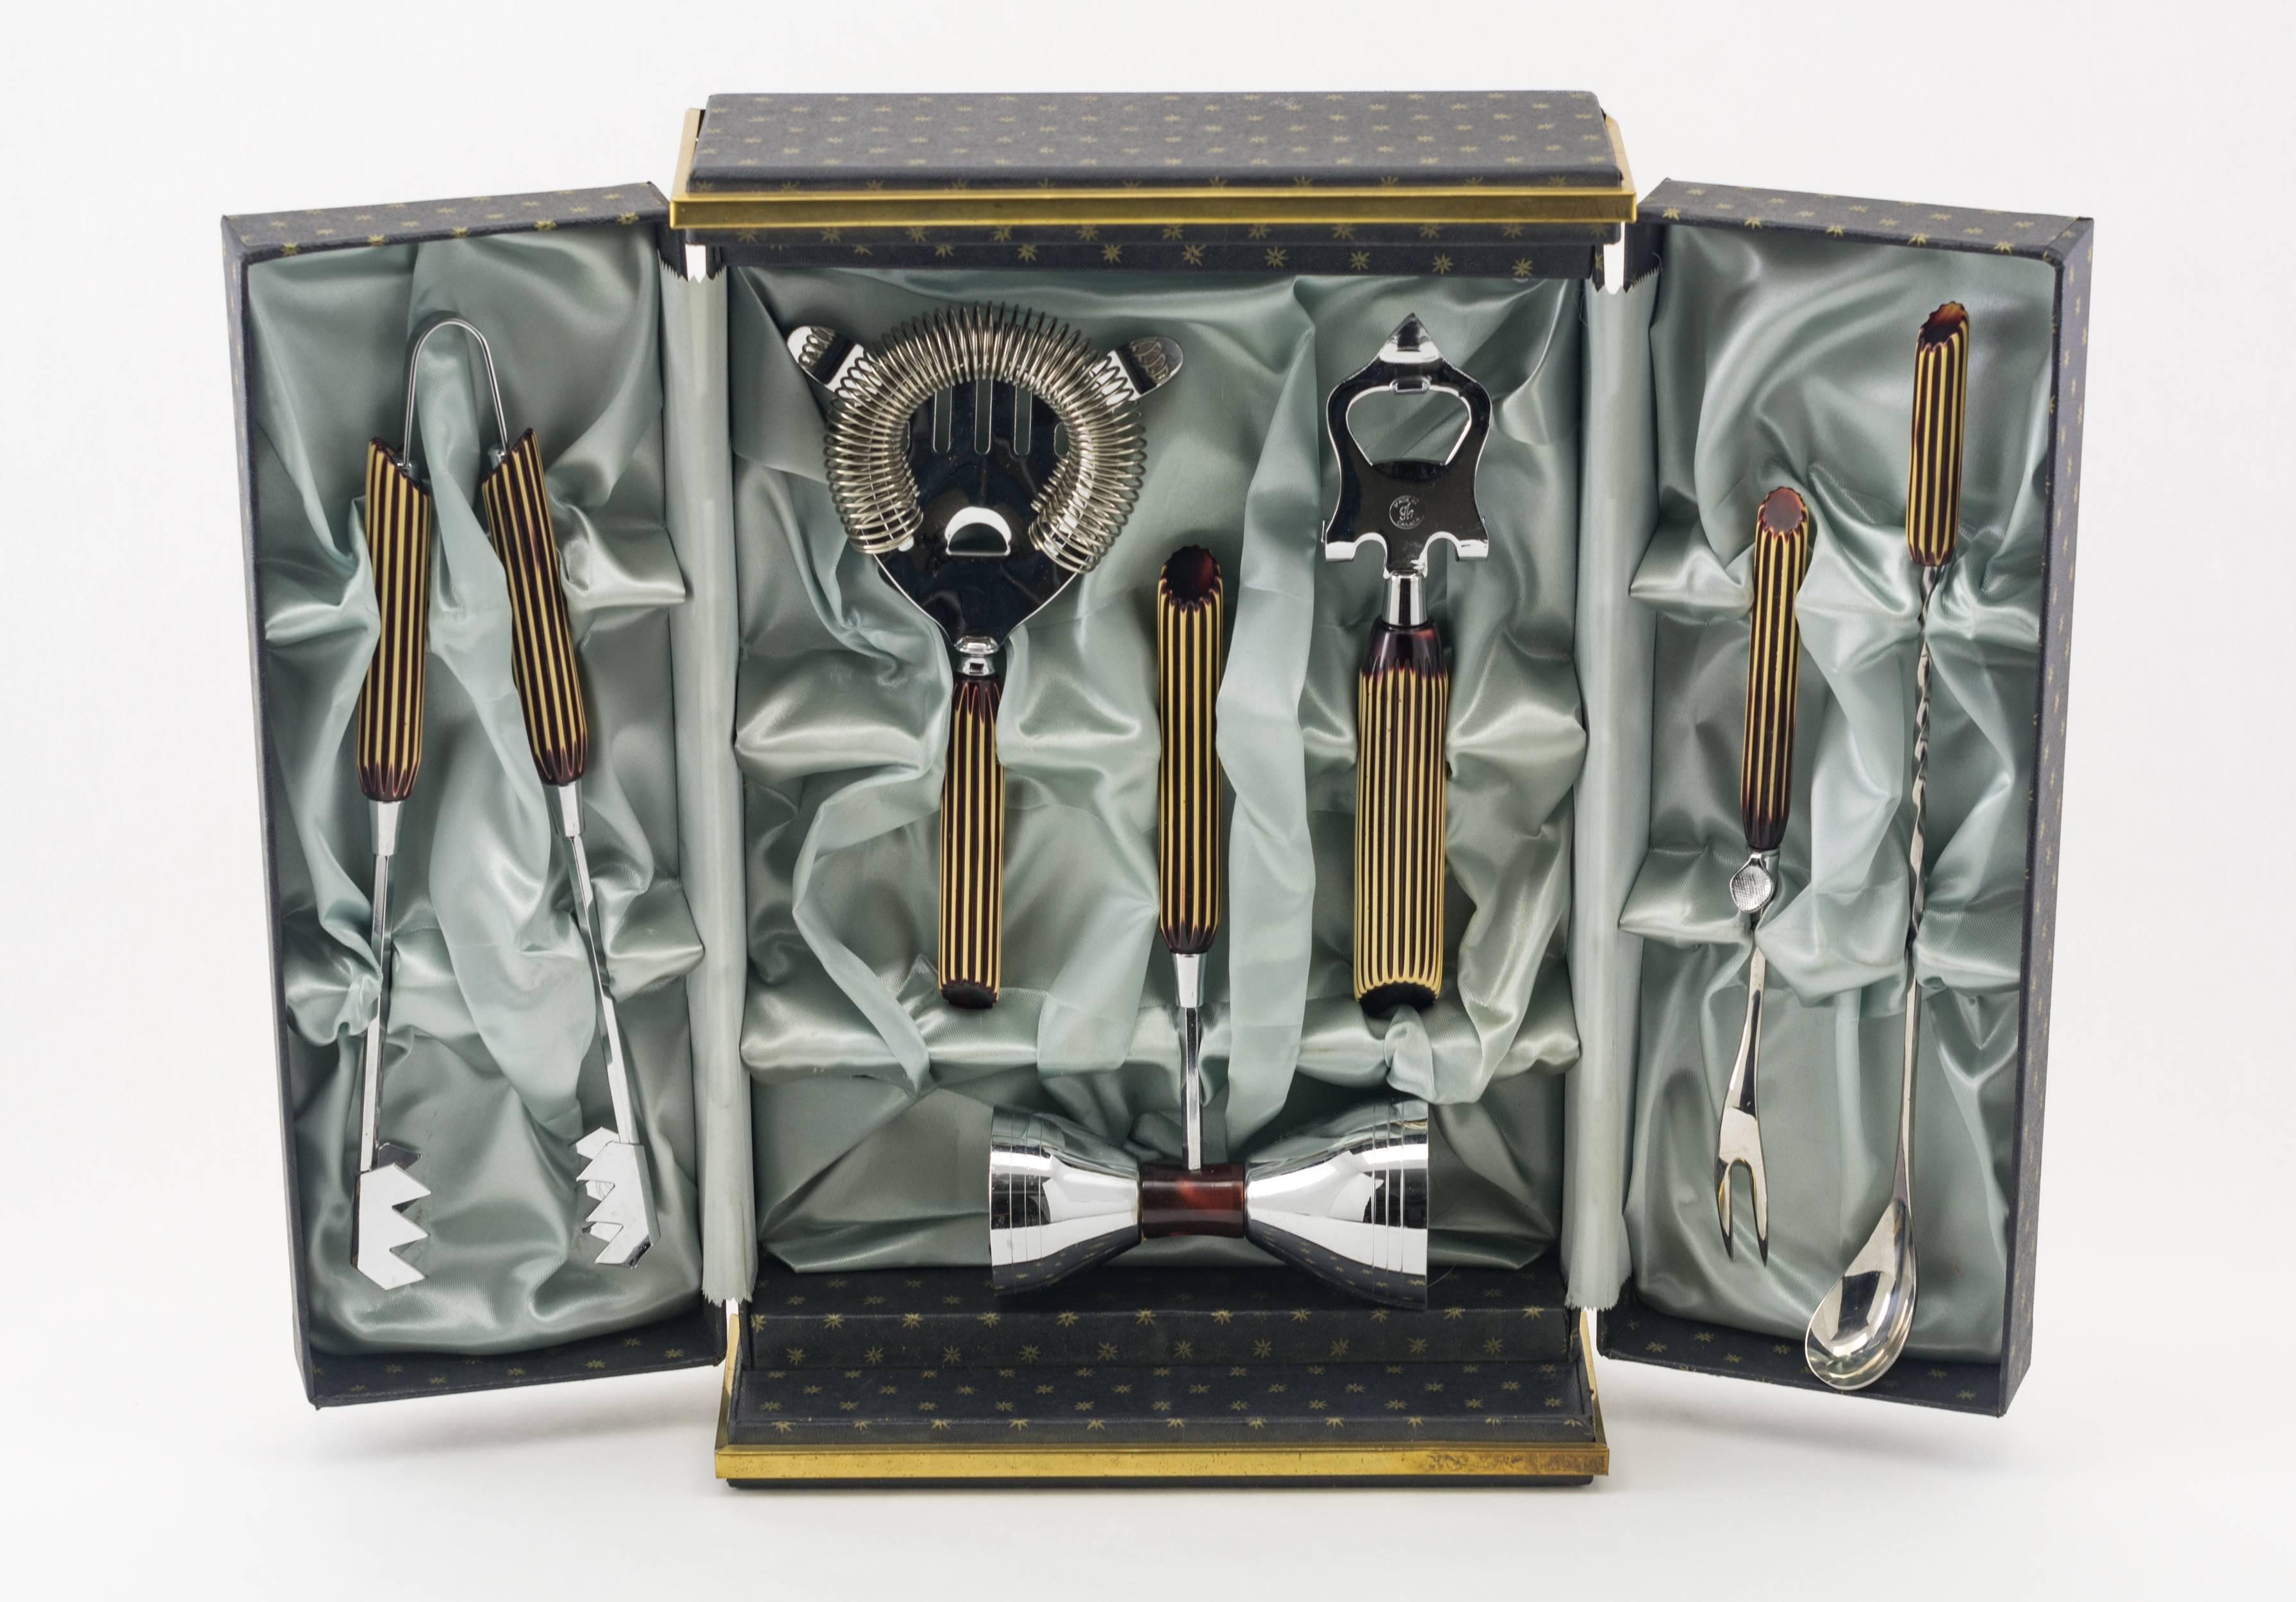 Vintage Glo-Hill six-piece bartool set, each chrome piece with
ivory cut to translucent red Bakelite handles – all in a lined, fitted
two door armoire-form box with metal details and covered in a star
patterned paper.
Canada, circa